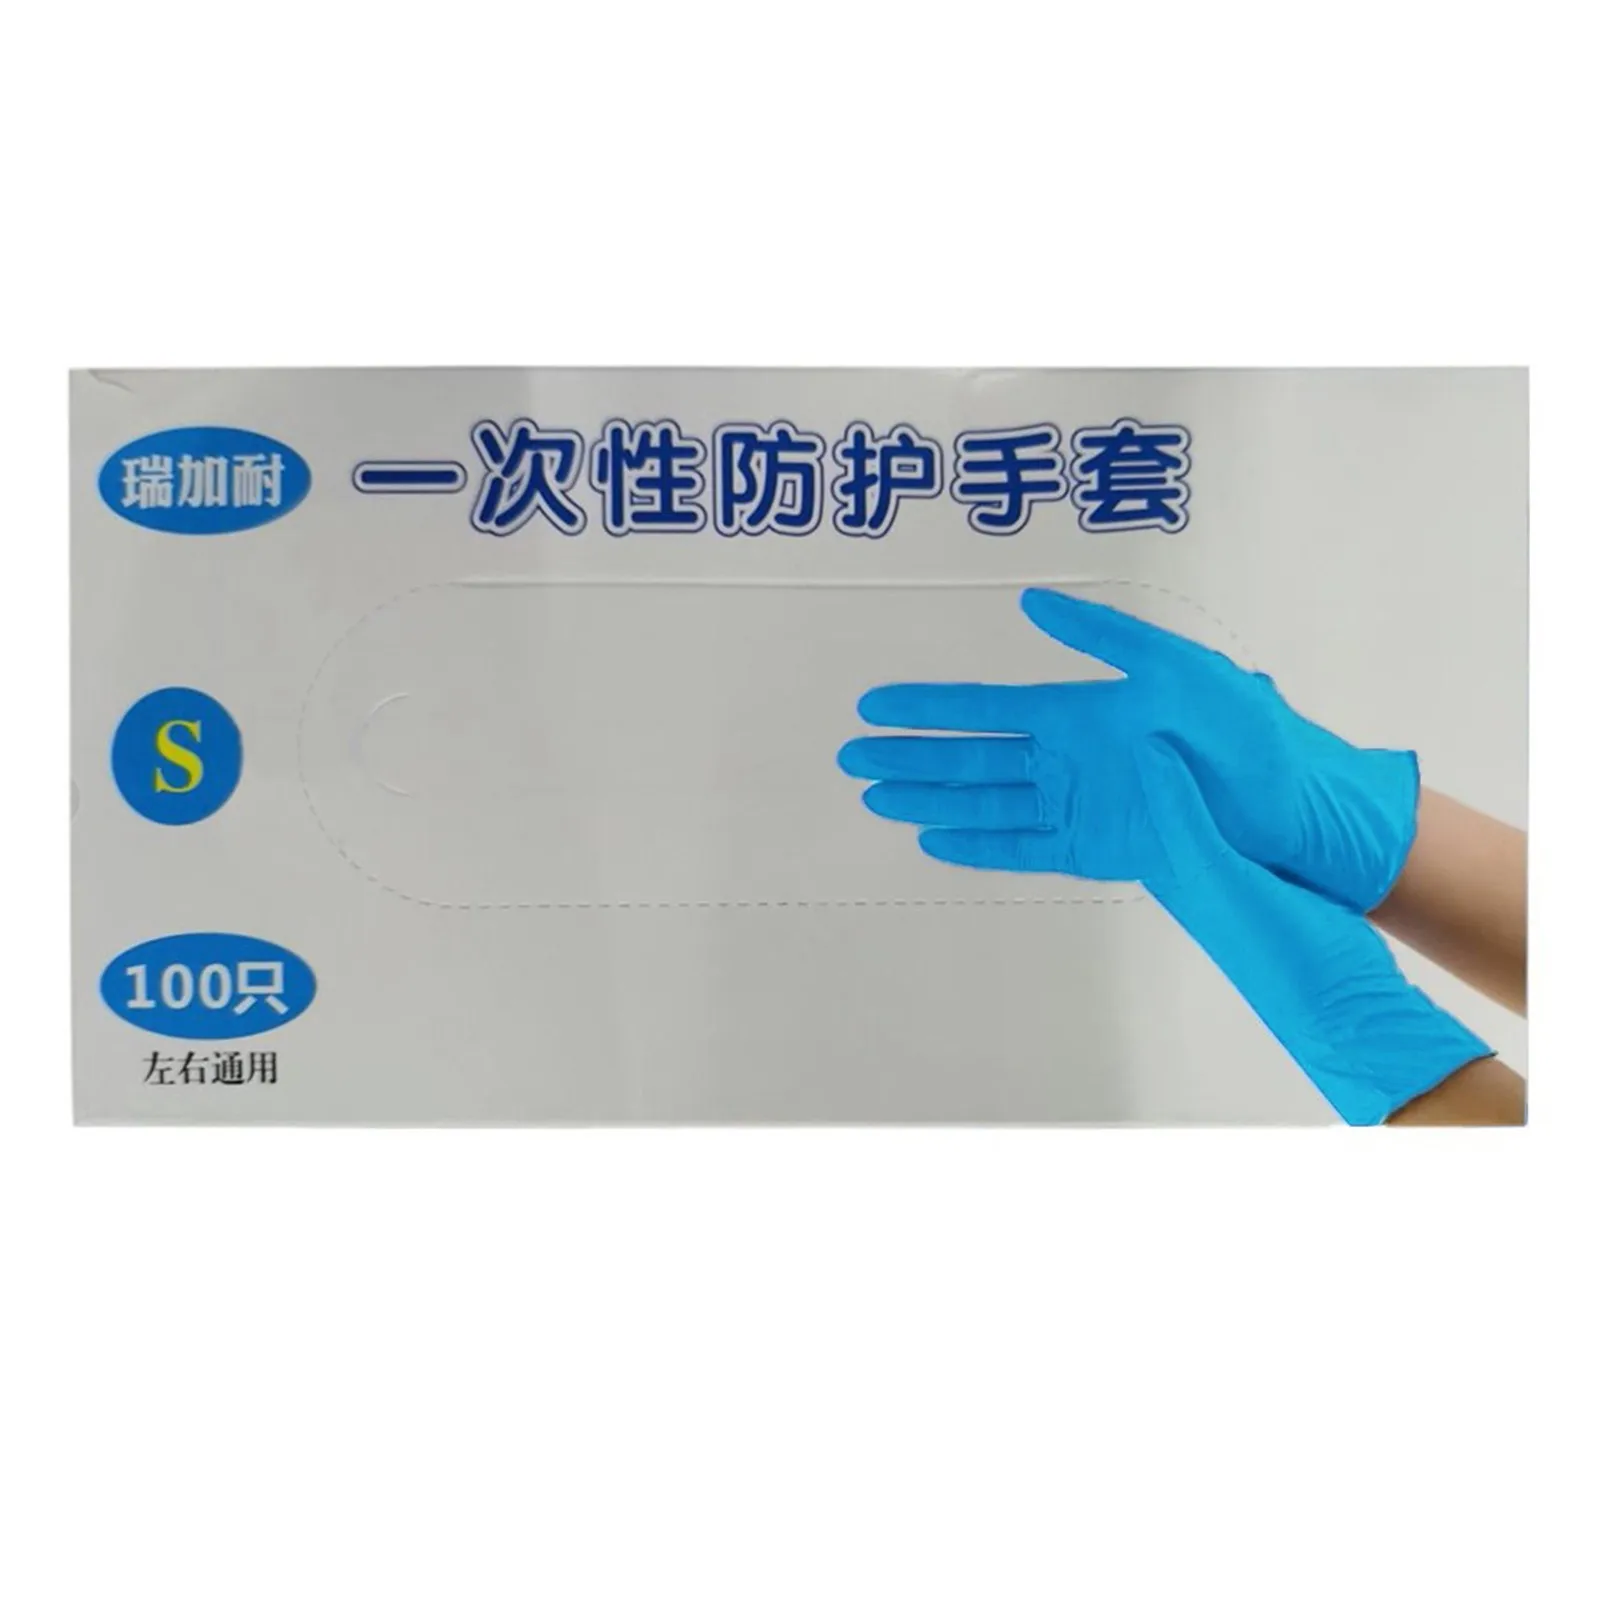 

100pc Disposable Gloves Latex Dishwashing Kitchen Work Rubber Garden Gloves Universal For Left And Right Hand Blue